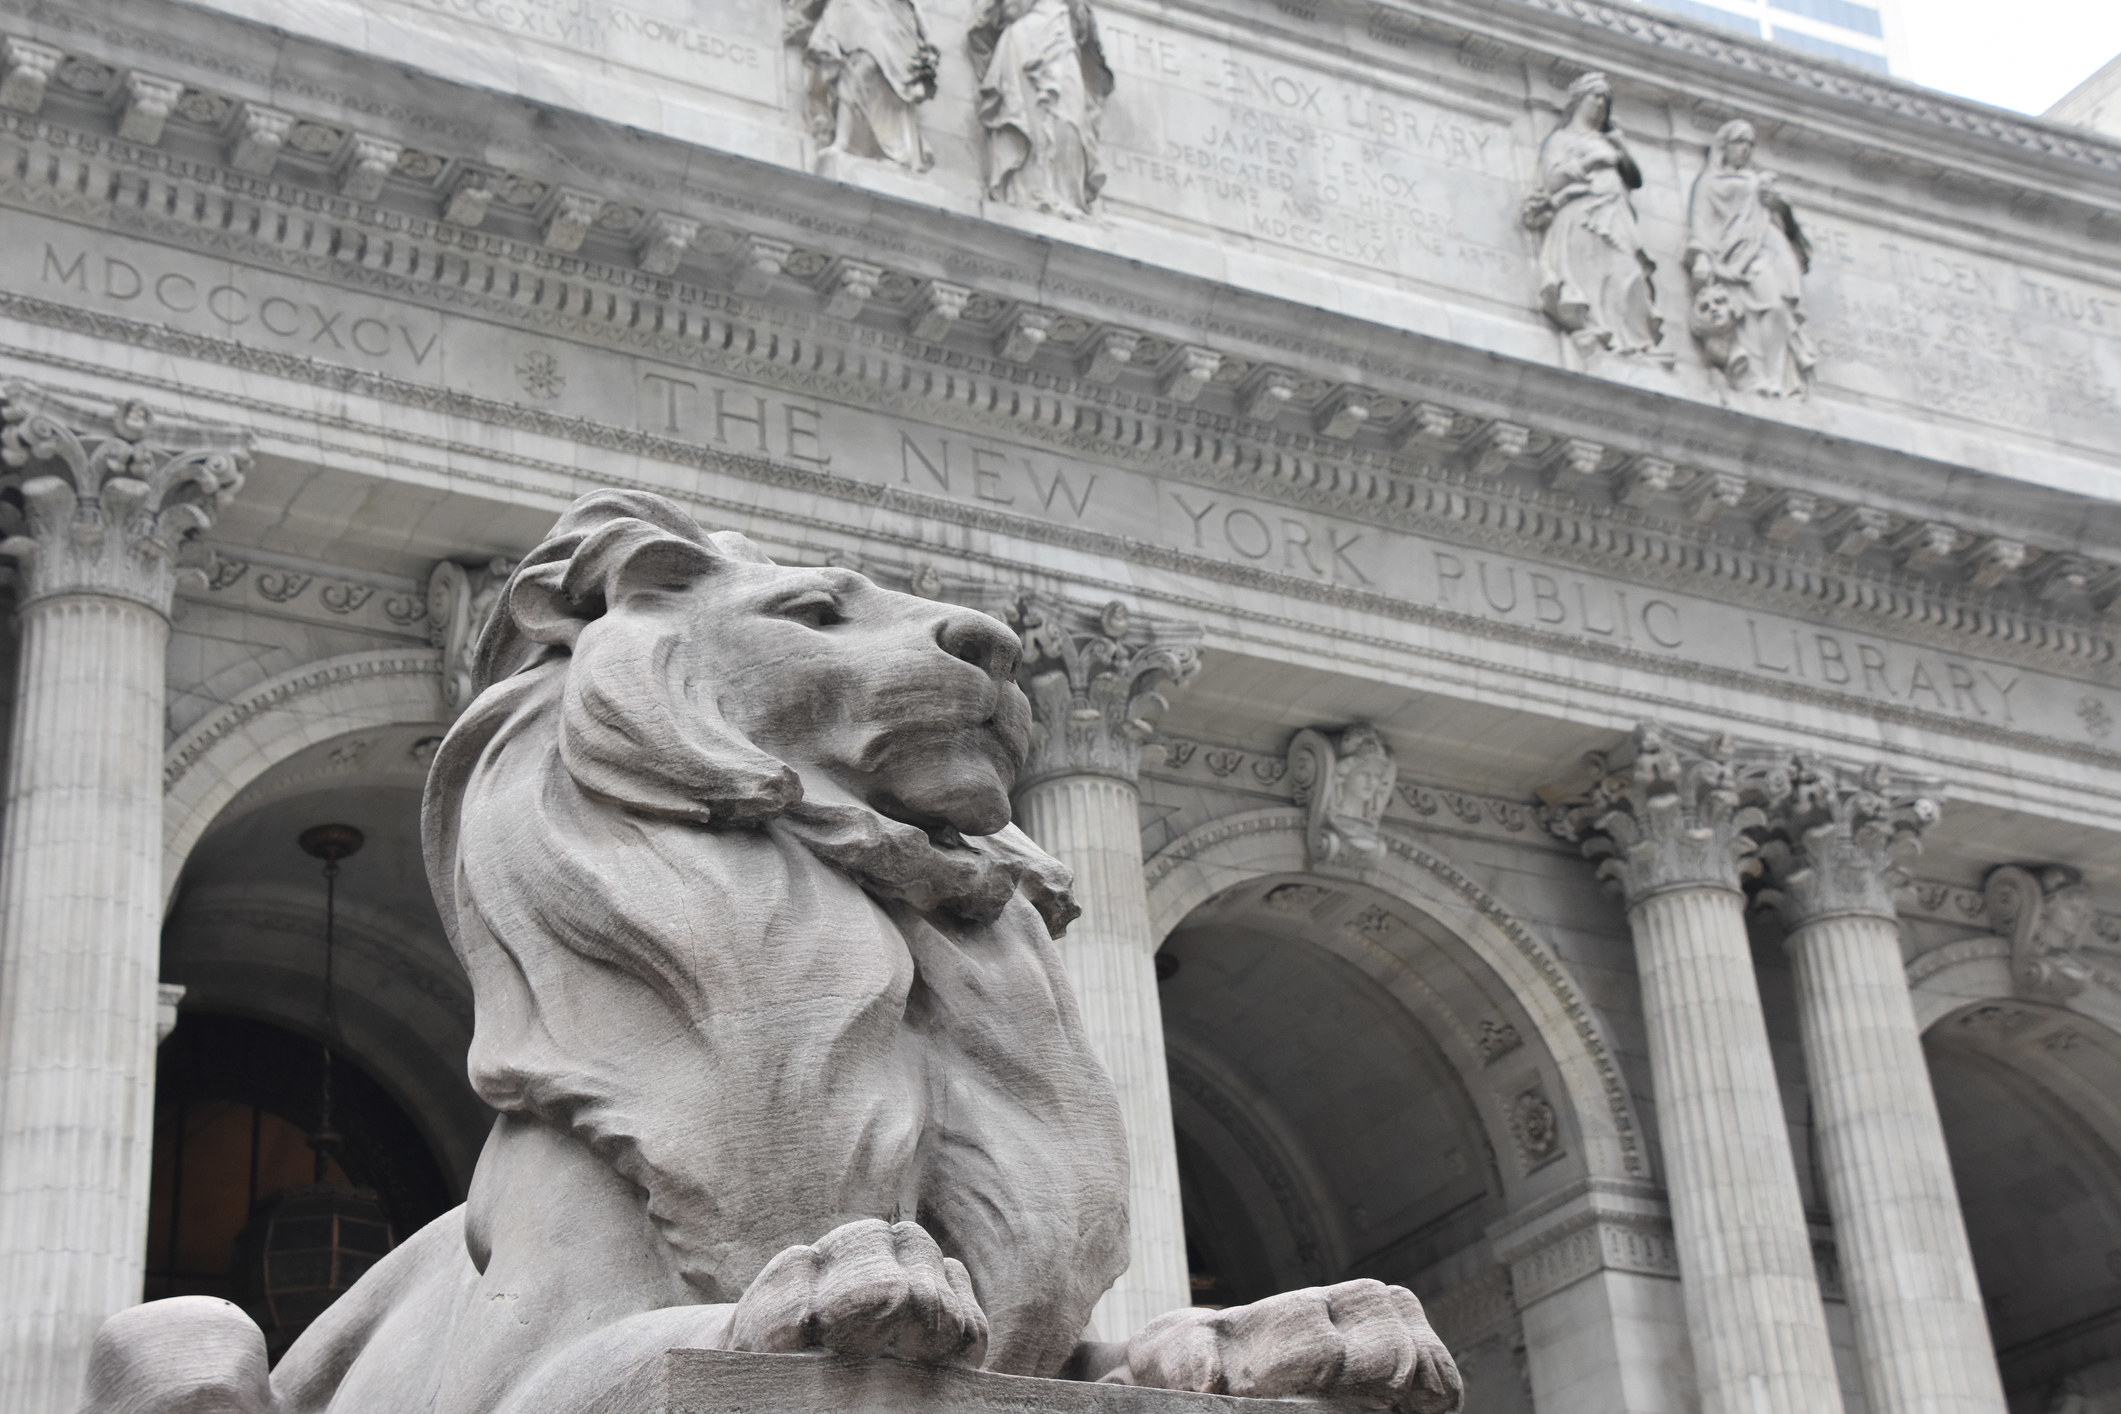 Lions outside the New York Public Library